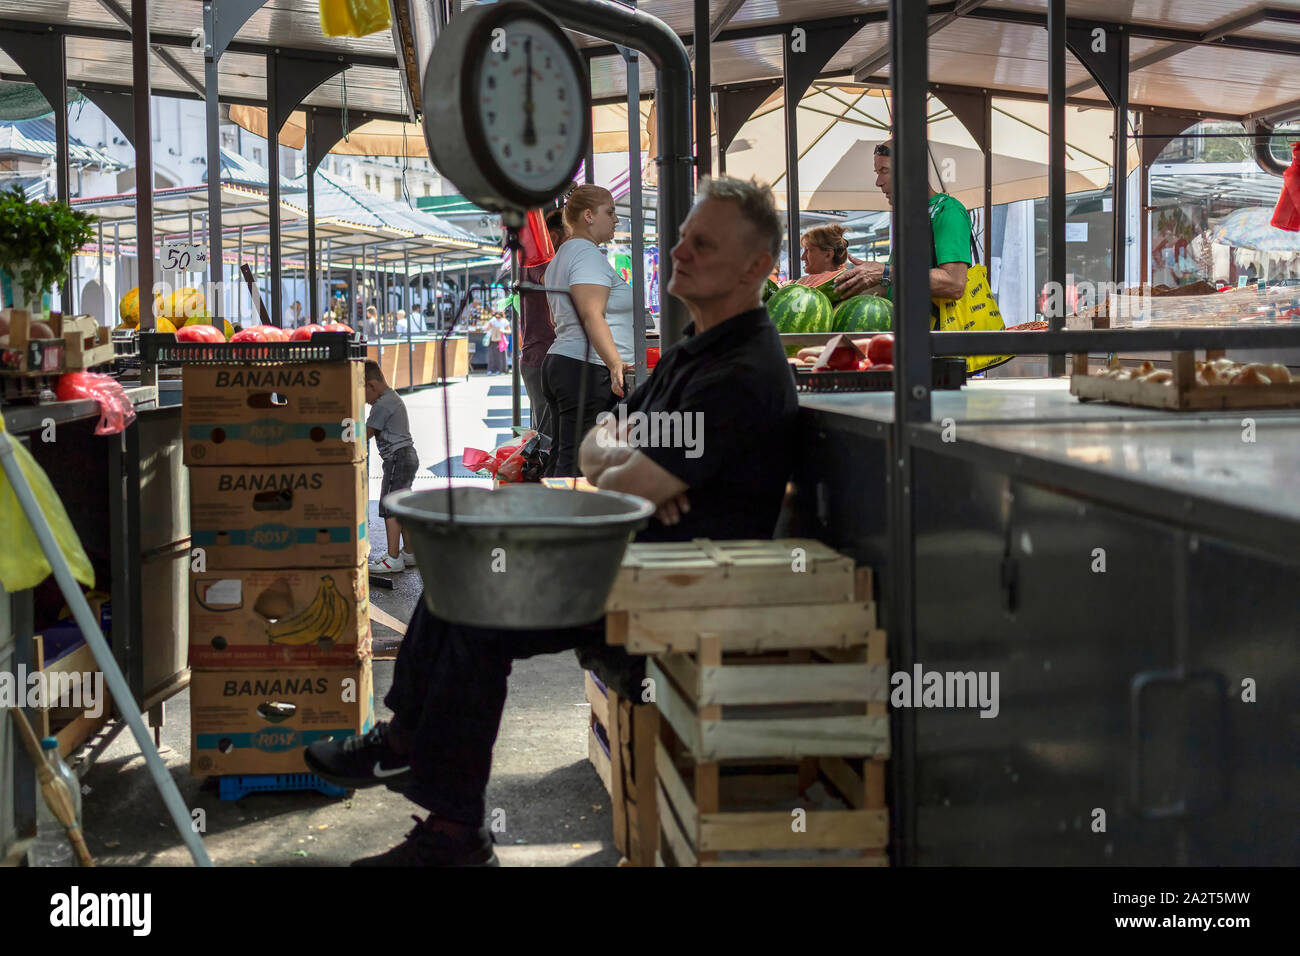 Belgrade, Serbia, Aug 15, 2019: Urban scene with customers and sellers around the stalls at Kalenić Green Market Stock Photo